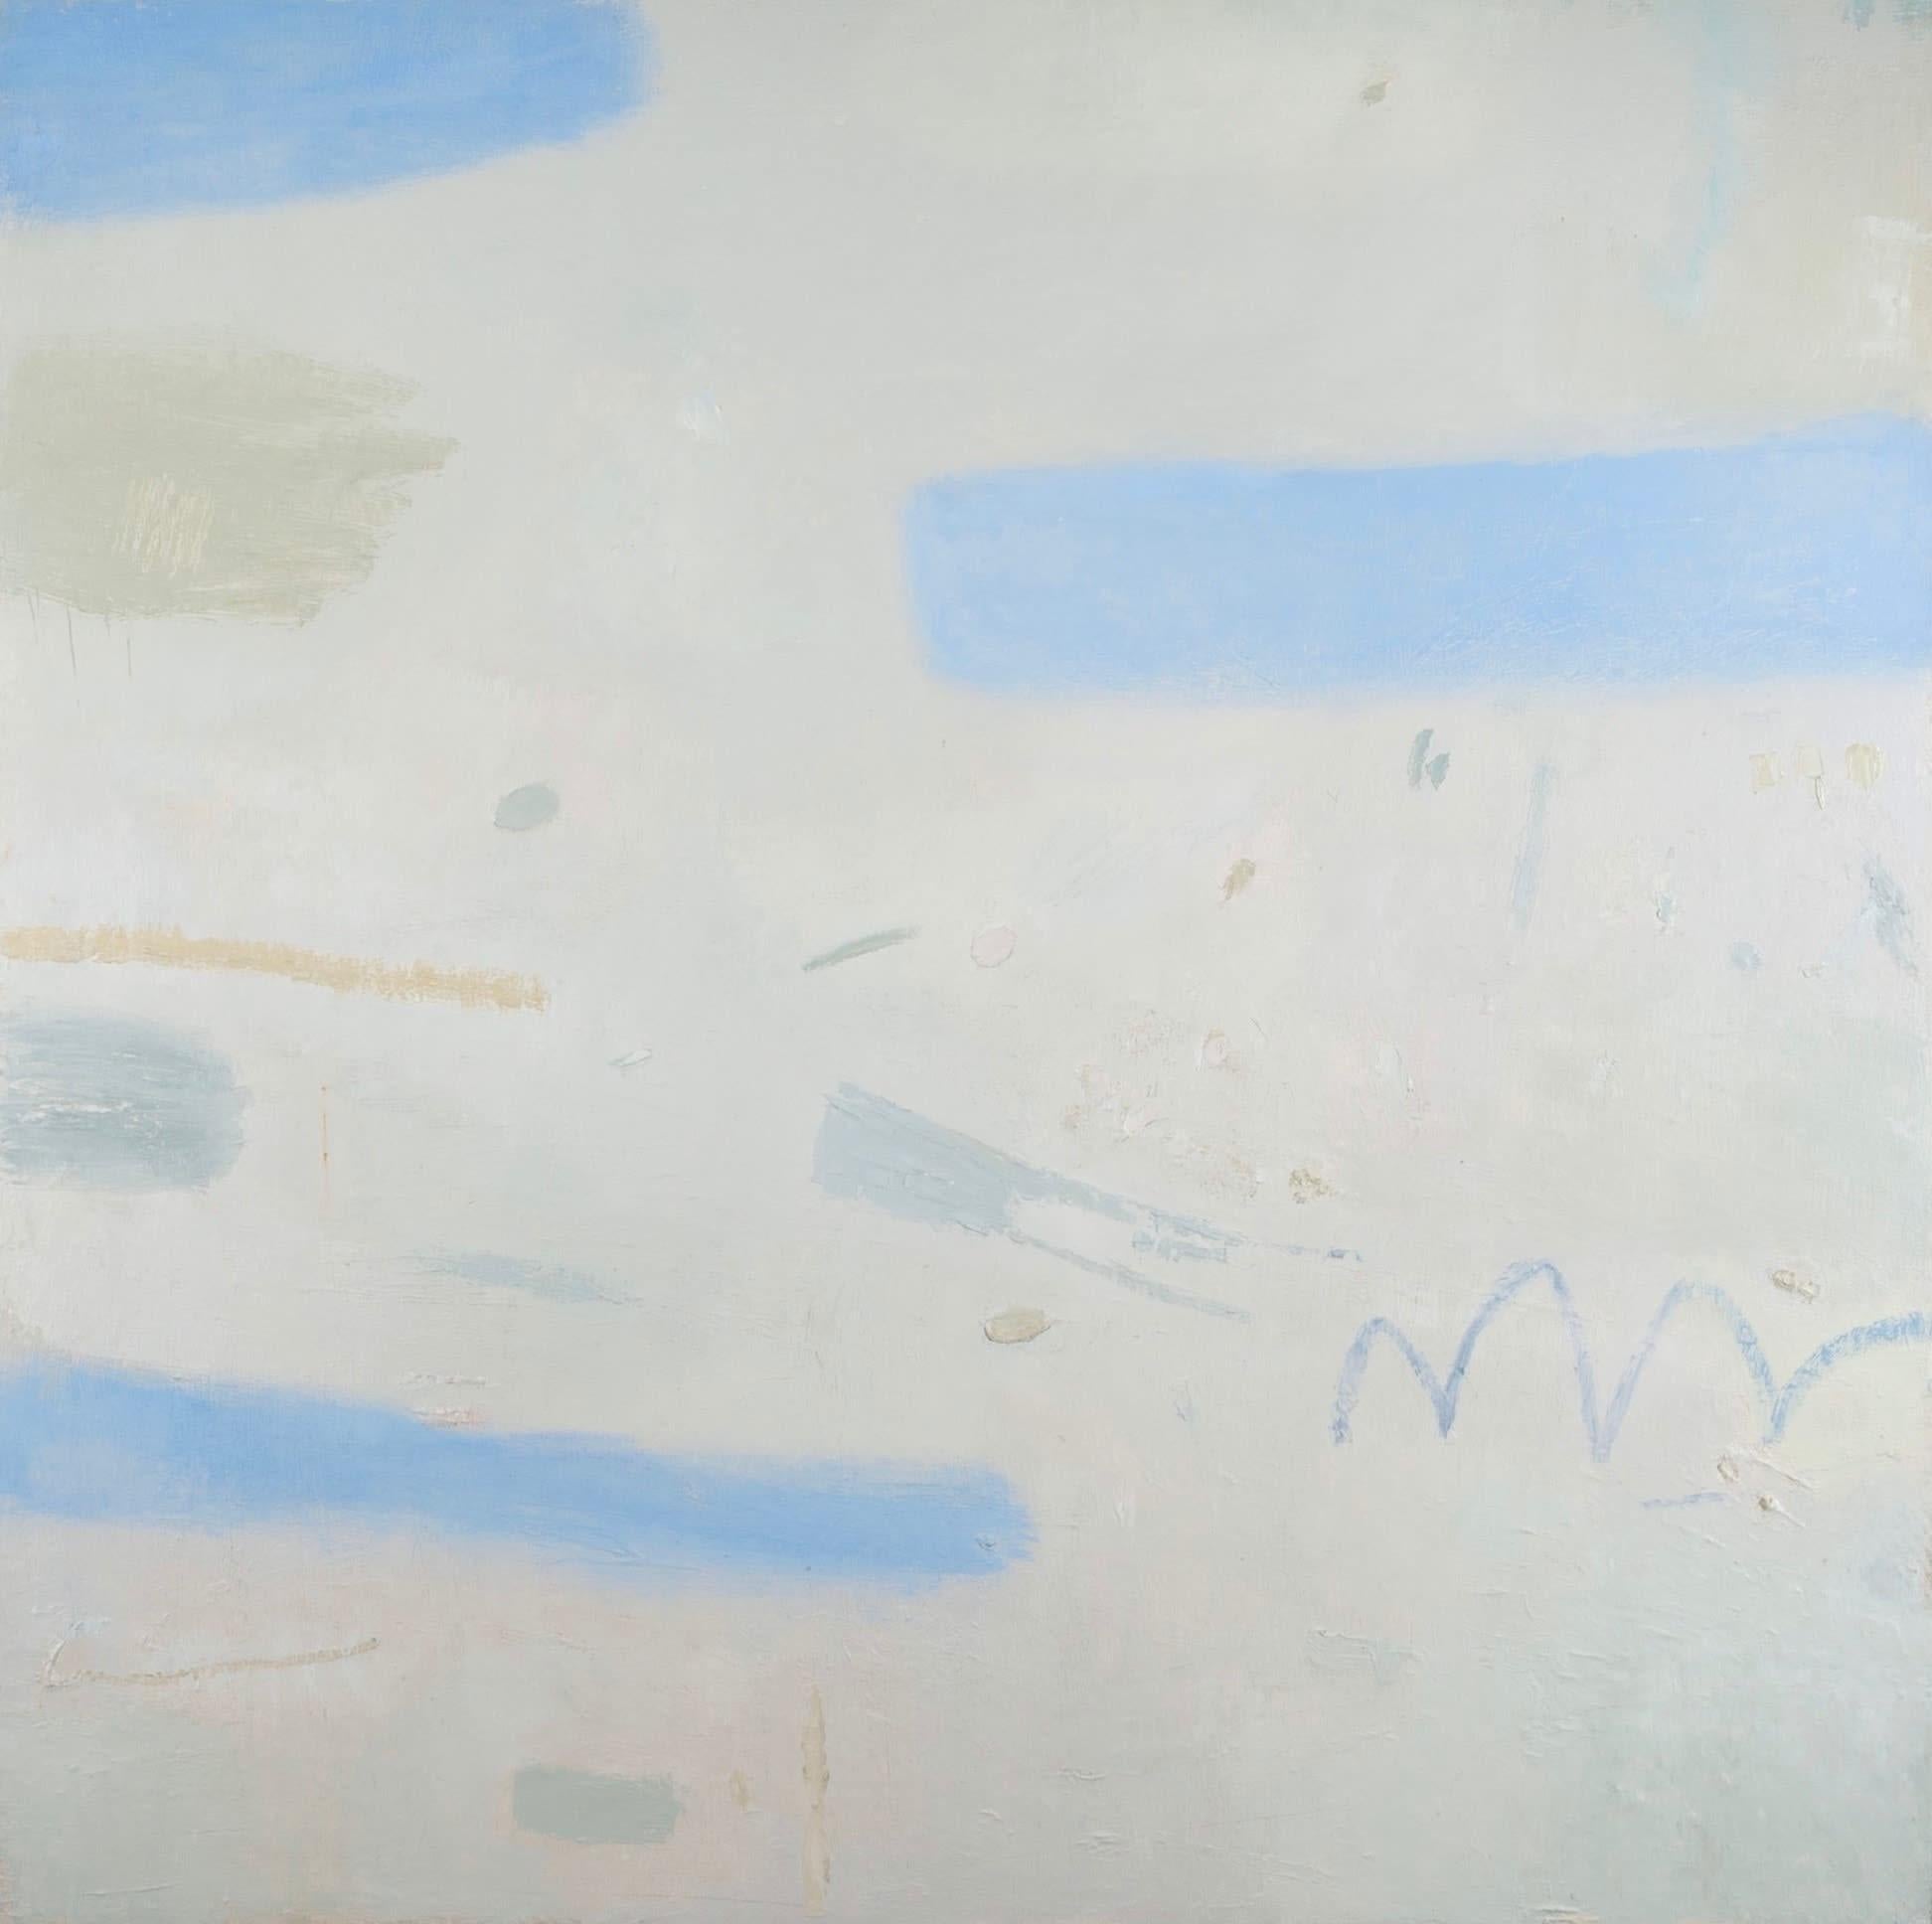 The Sky Meets the Sea, Oil on Canvas Painting by Jenny Lock B. 1949, 2023

Additional information:
Medium: Oil on canvas
Dimensions: 90 x 90 cm
35 3/8 x 35 3/8 in
Signed, titled and dated

Jenny Lock came to painting later in life and the fresh